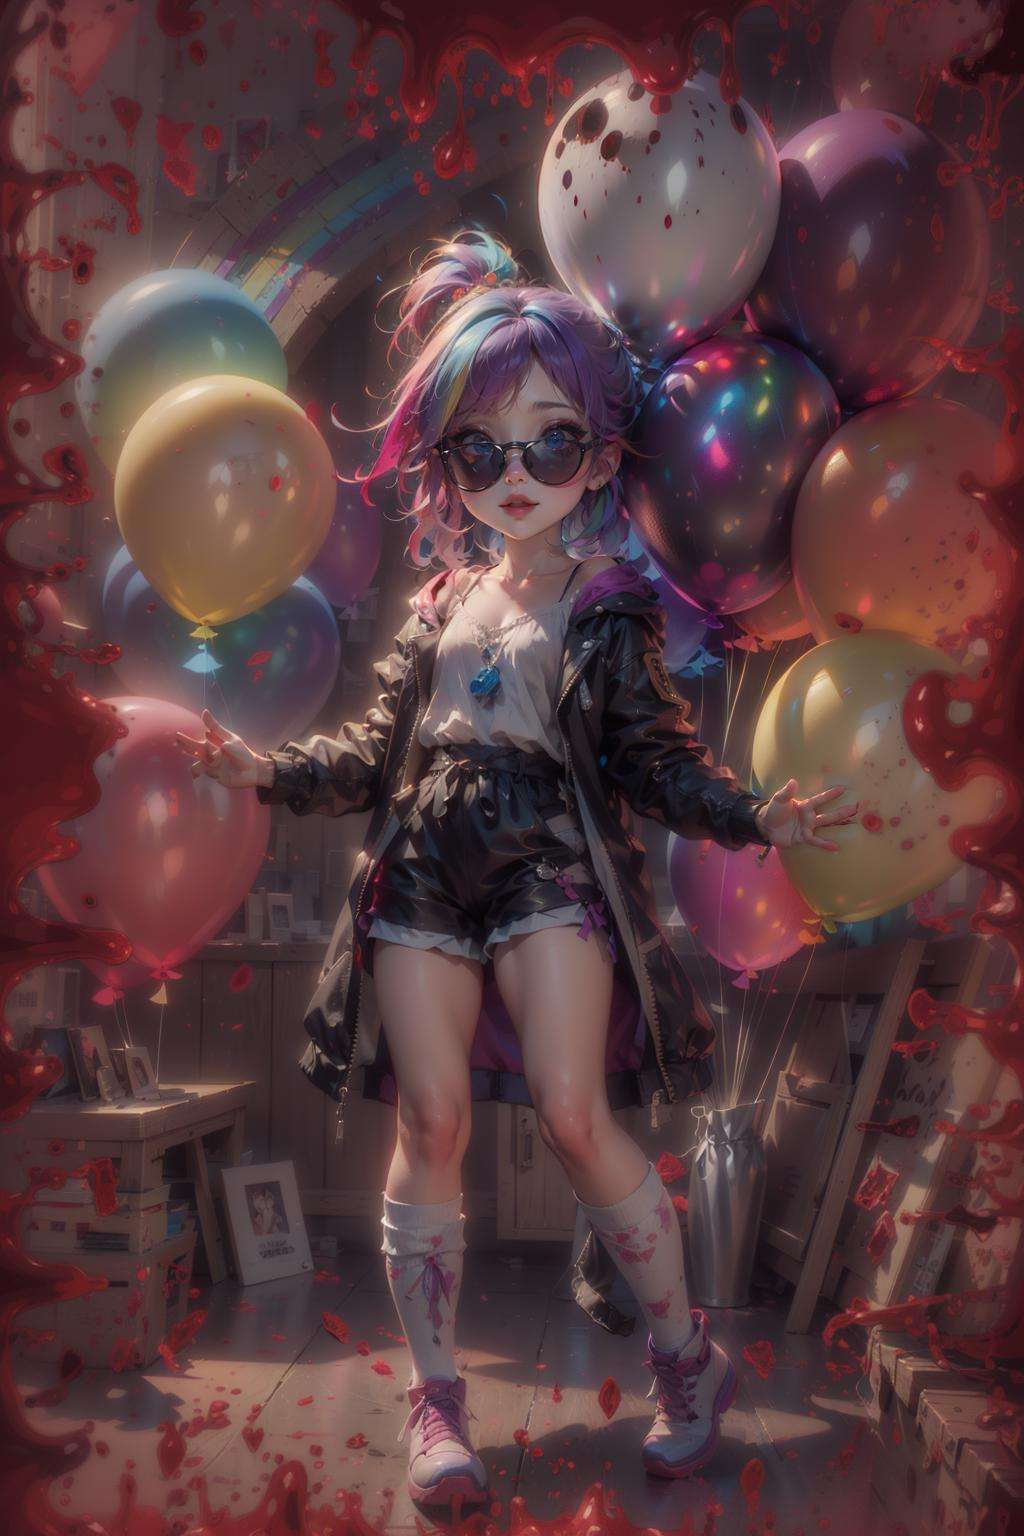 masterpiece, best quality, 1 girl, pretty and cute, (rainbow color Highlight Hair,colorful hair:1.4), wearing blue and purple sunglasses, yellow jacket with white pattern, white sweater, many colored balloons, doll face, ponytail braid, perfect detail eyes, delicate face, perfect cg, HD quality, colored balloons, sky ,black boots,<lora:BloodOnScreenv10:0.9>, BloodOnScreen,